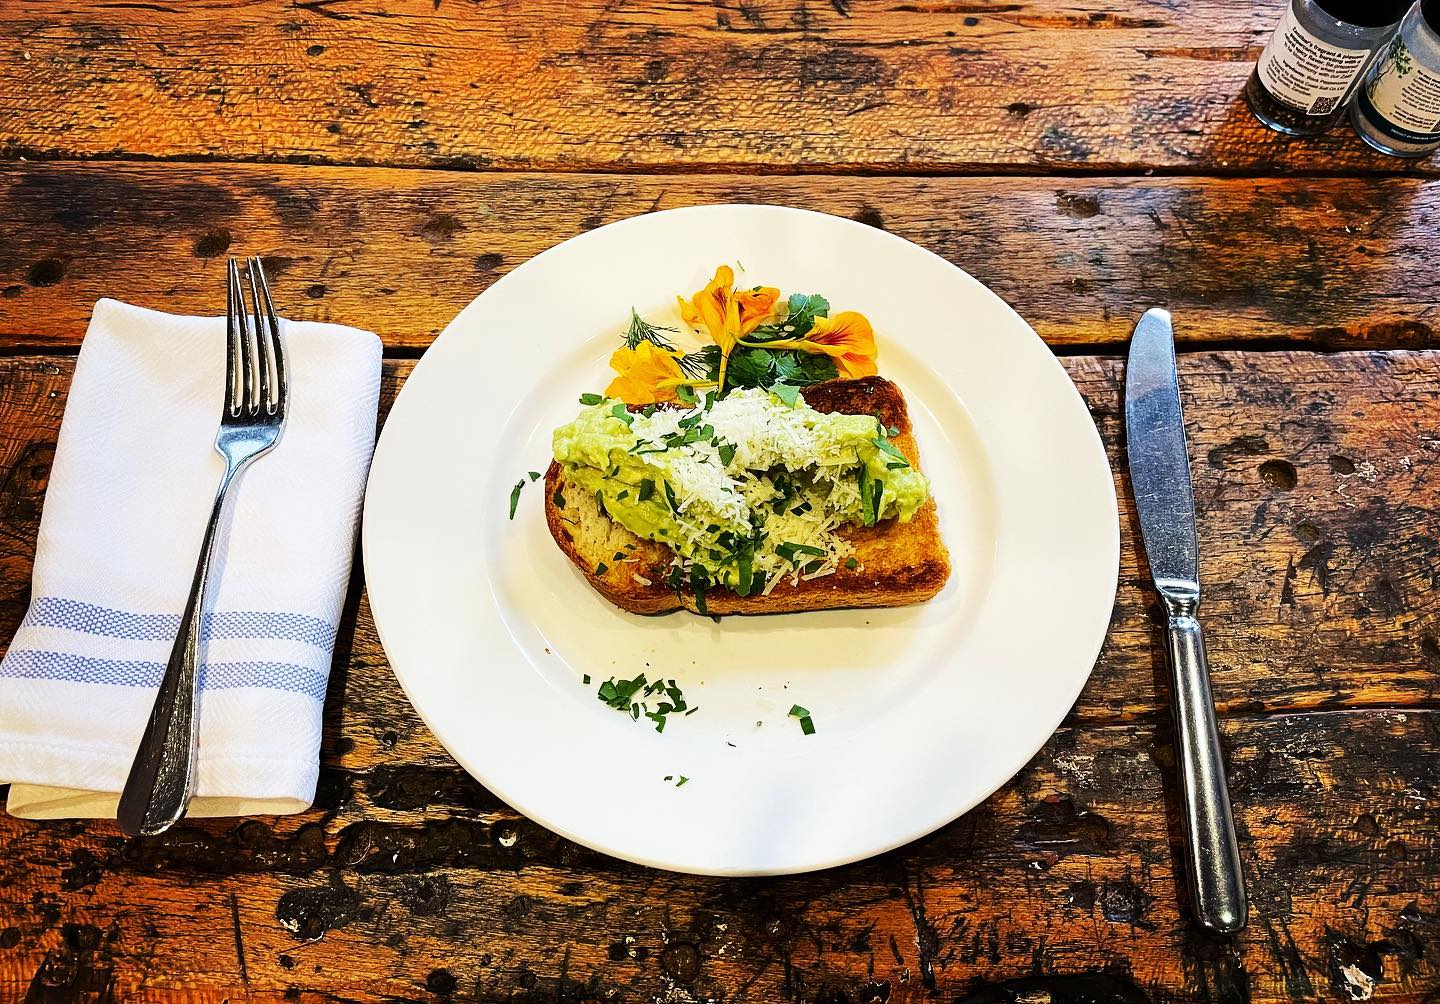 Happiness is smashed avocado 🥑 on toast. With at least 6 different types of avocado trees on the property we have fresh farm avocados almost all year round. #smashedavo #avocado #avocadotoast #smashedavocado #breakfast #breakfastlover #brunch #happiness #happinessis #happy